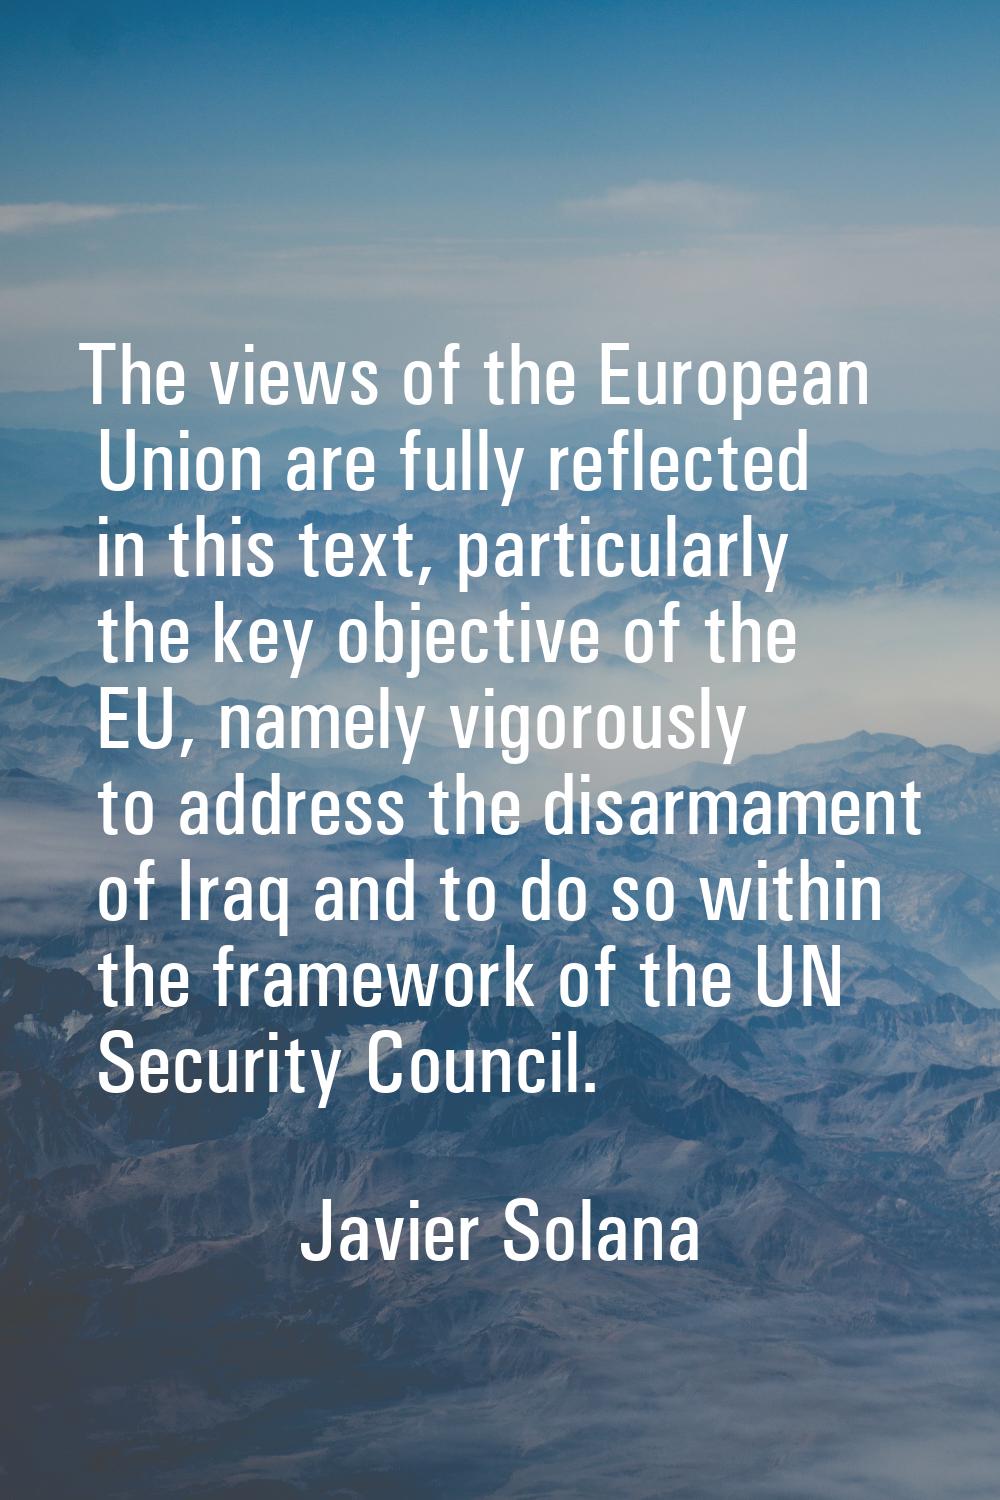 The views of the European Union are fully reflected in this text, particularly the key objective of